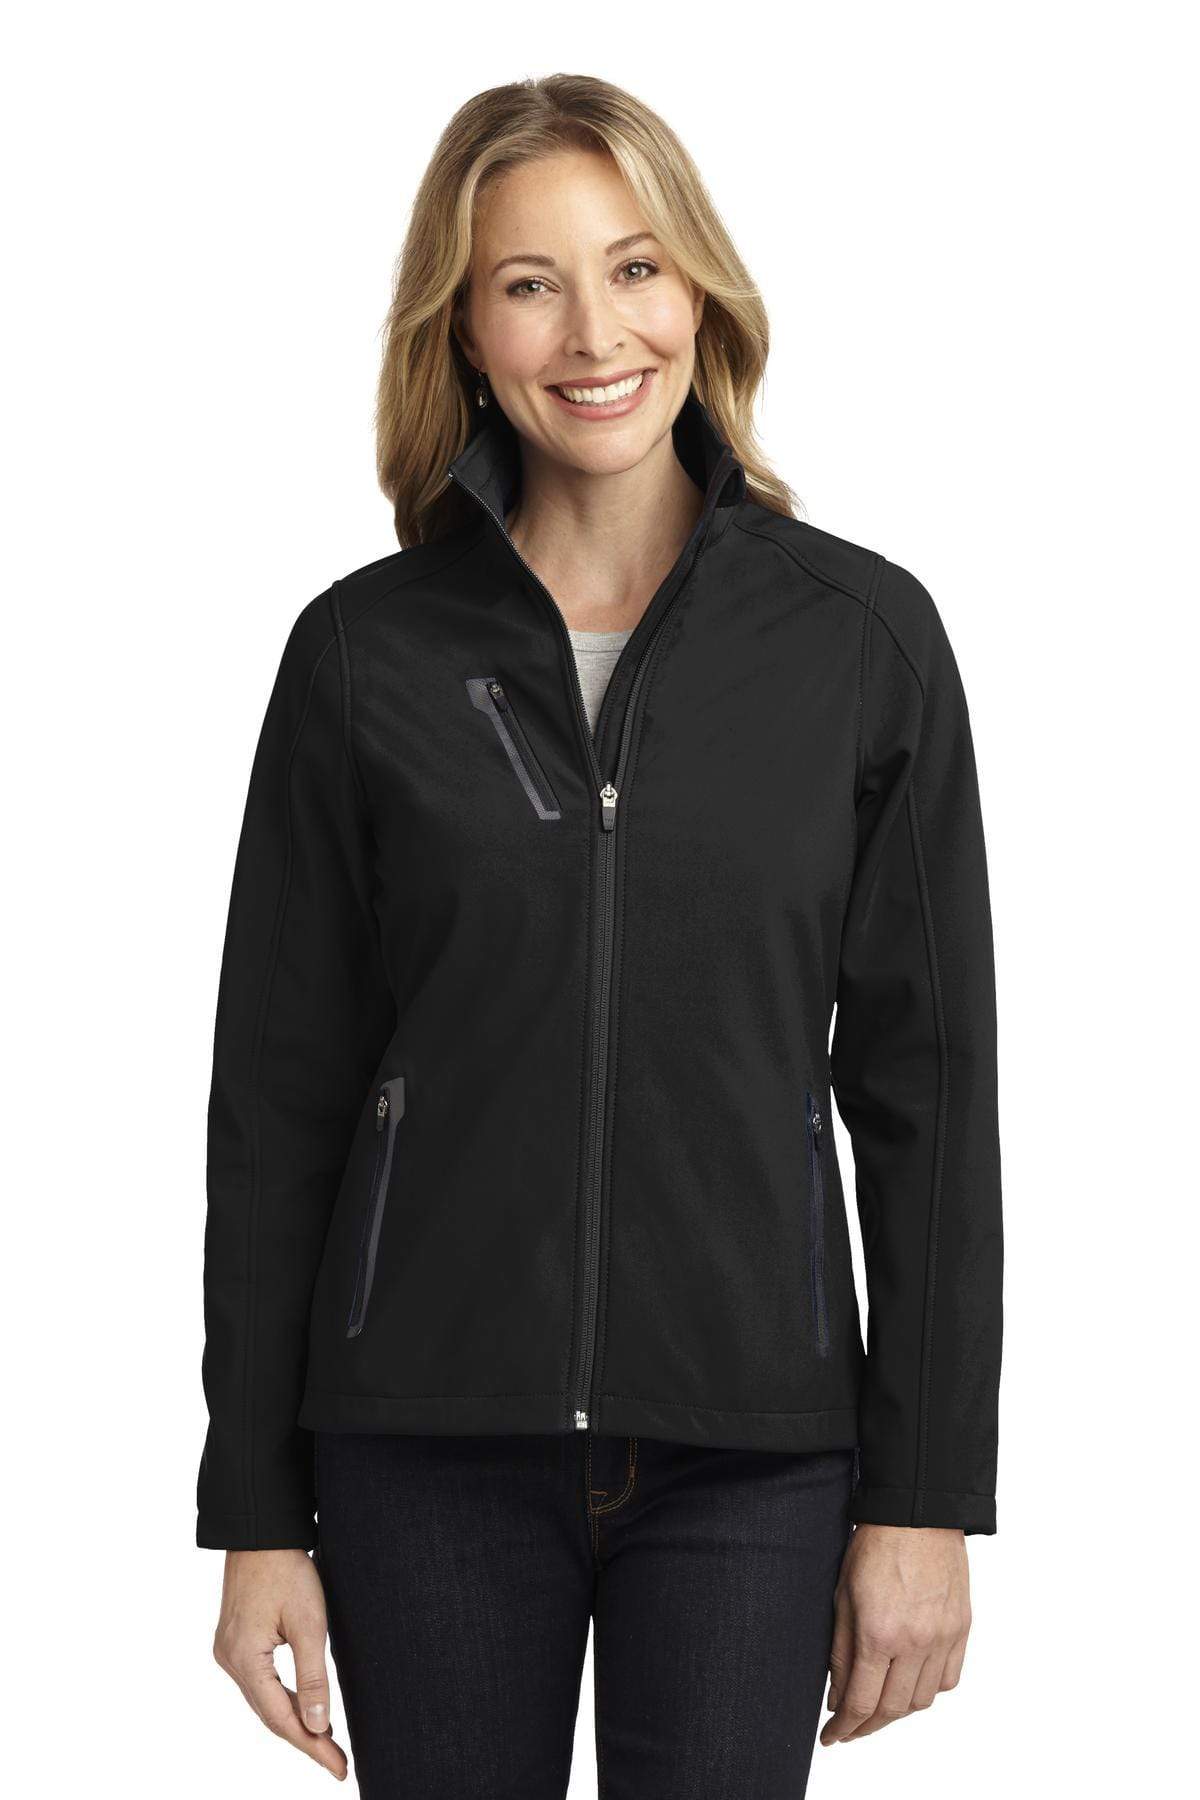 Port Authority Ladies Welded Soft Shell Jacket L3243081